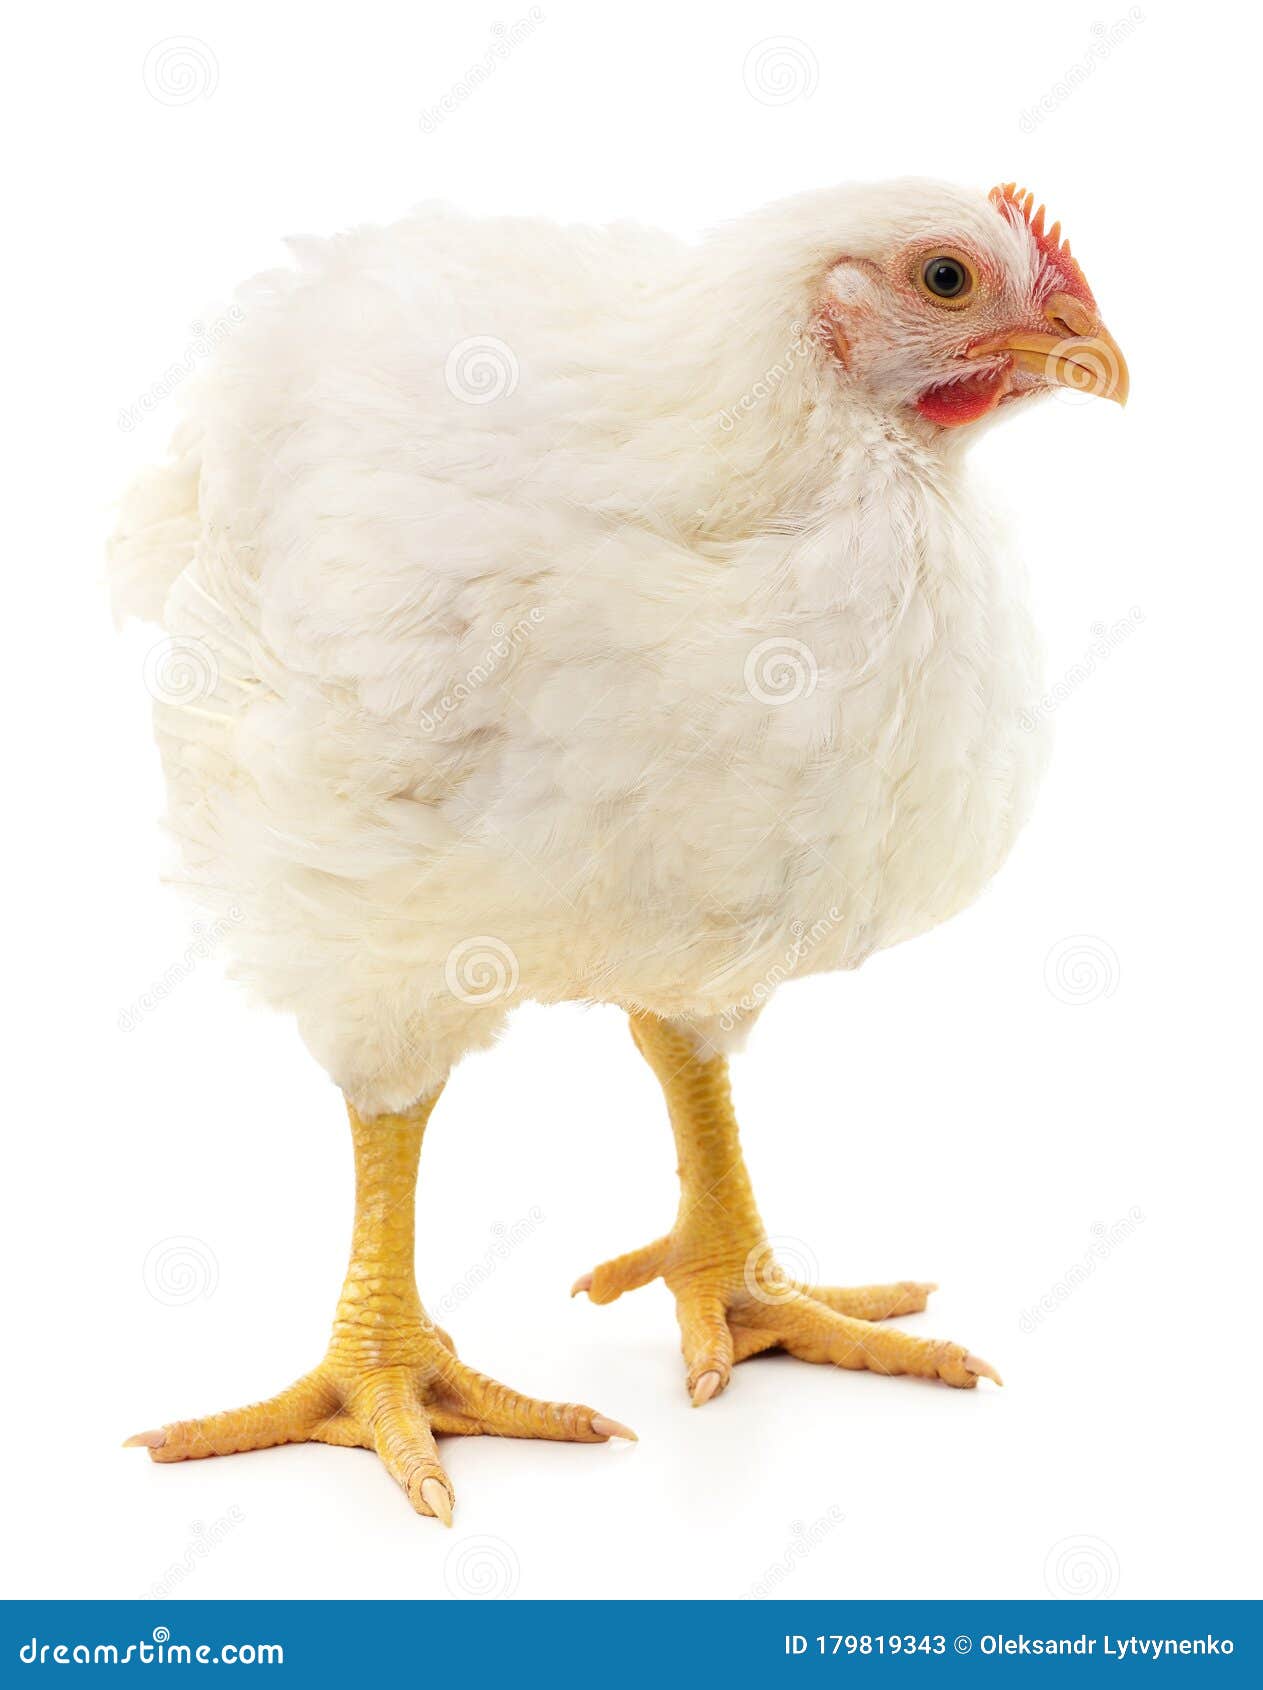 White big hen stock image. Image of farm, meat, summer - 179819343